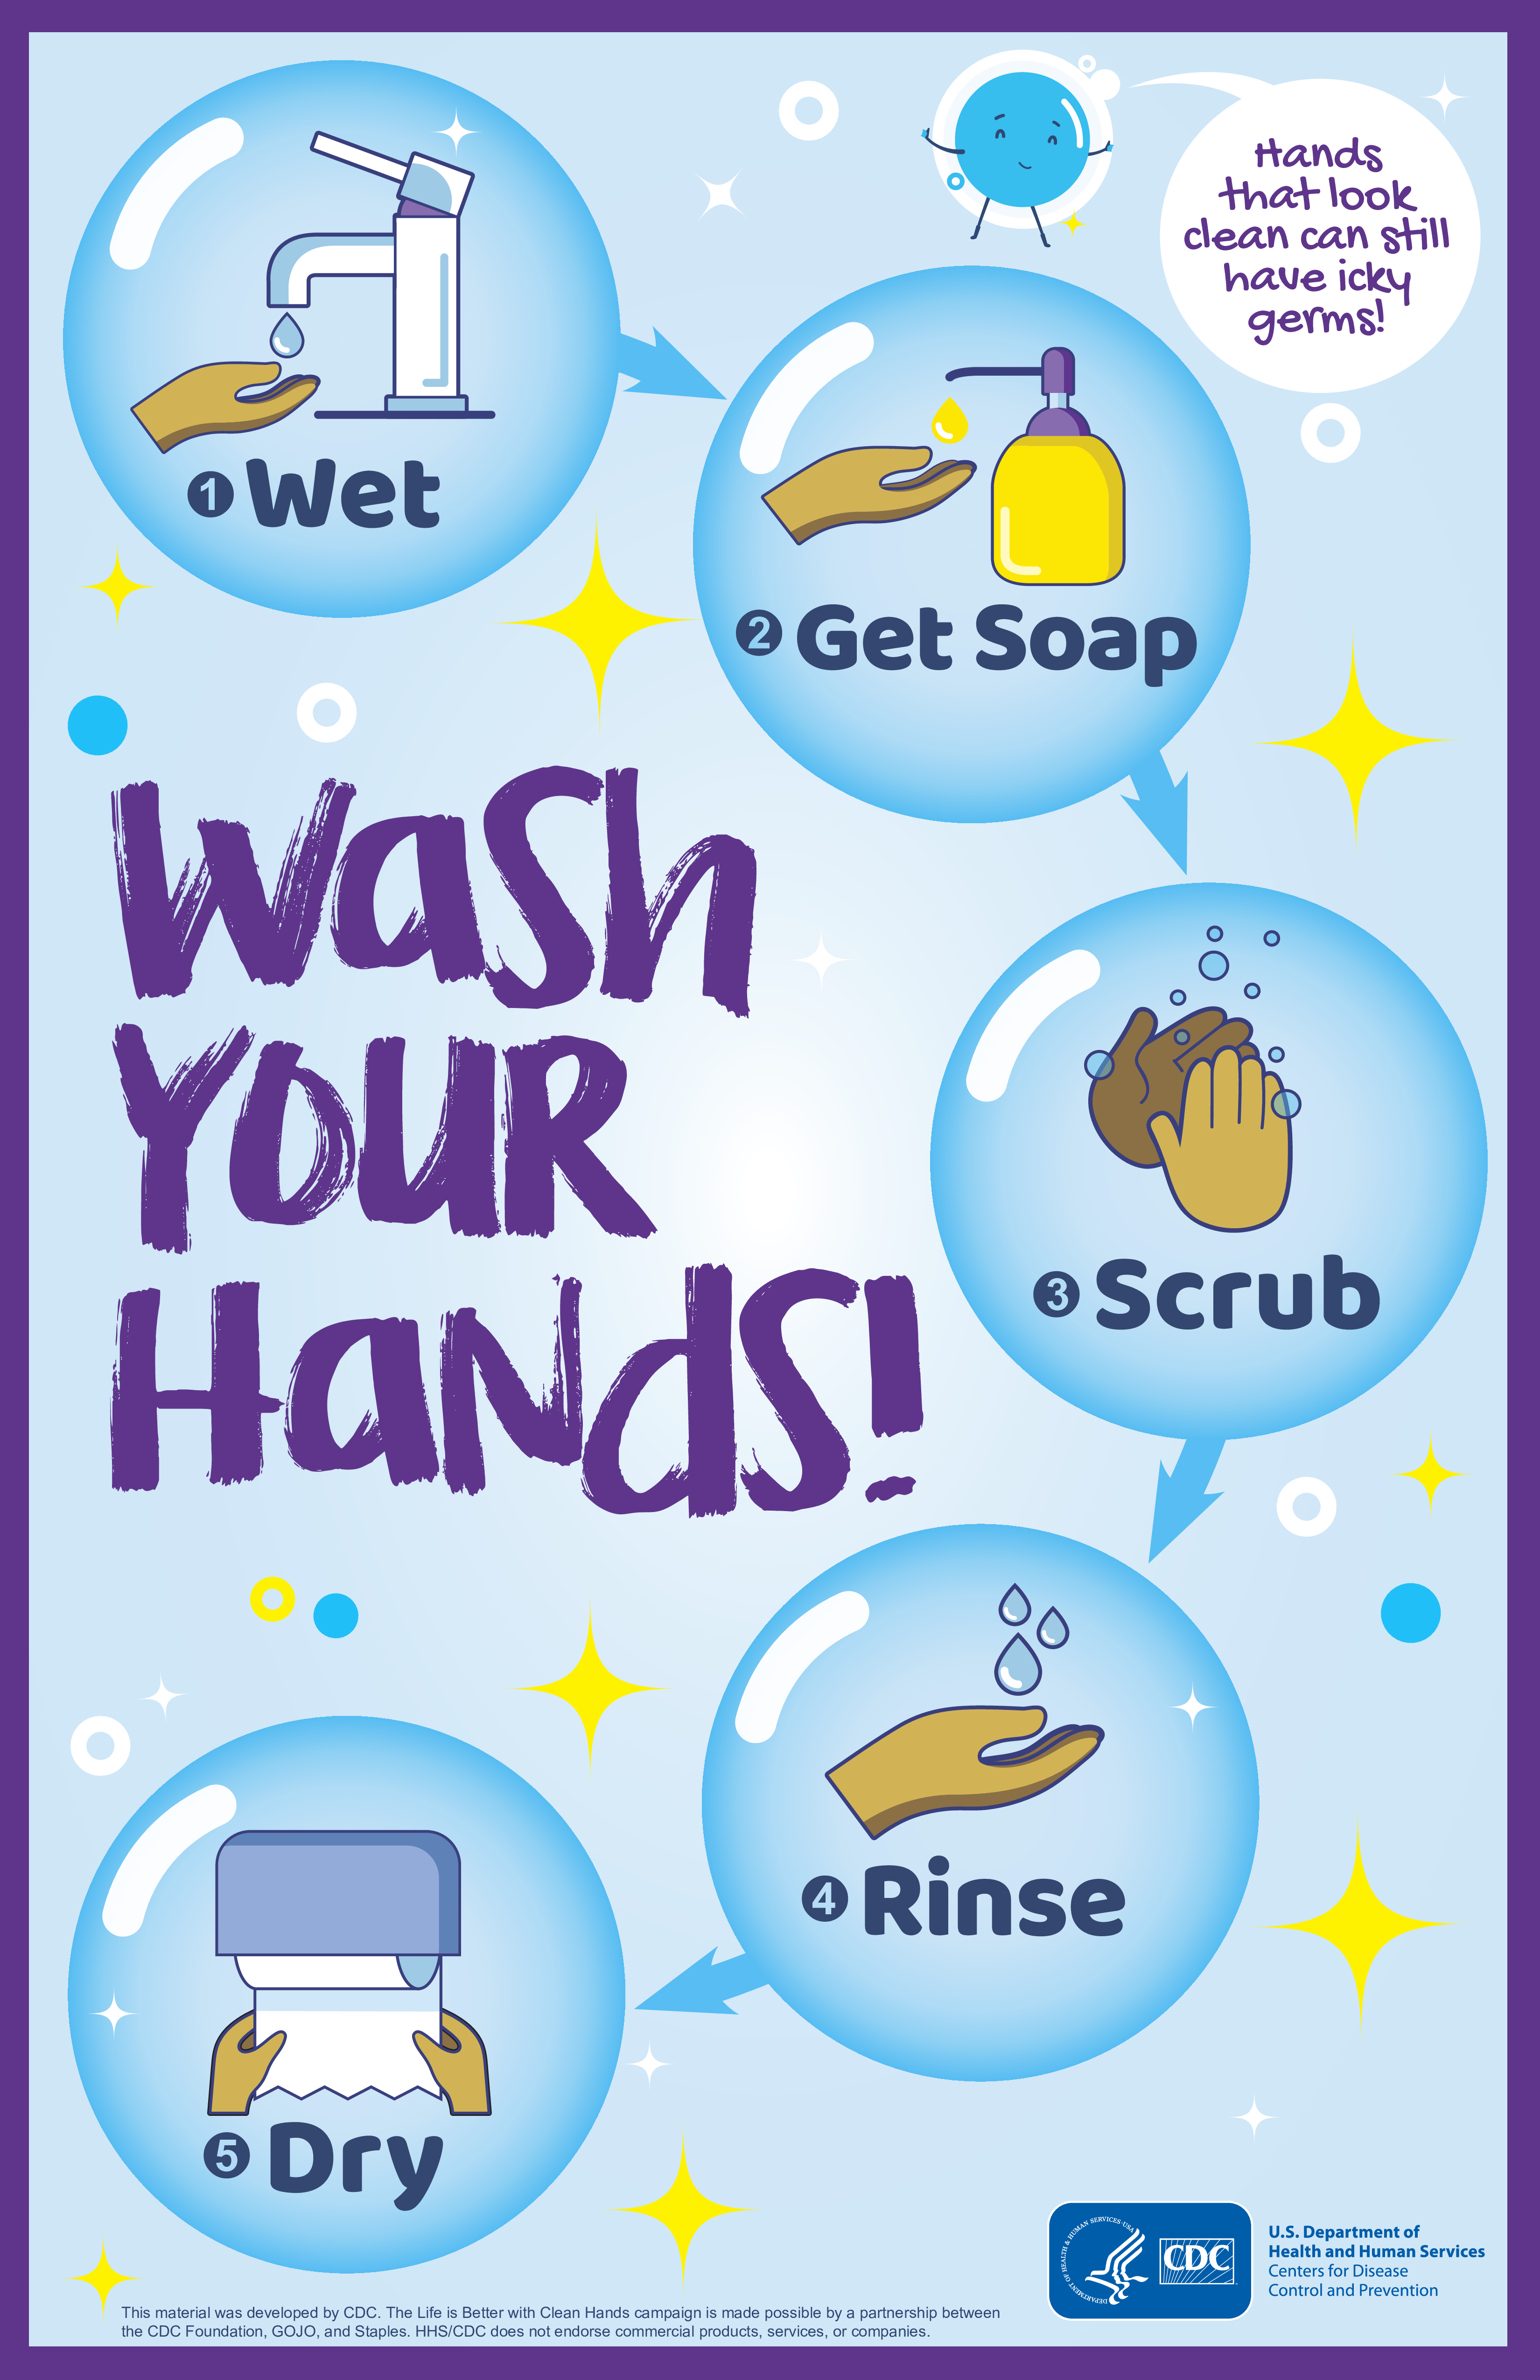 Image of flyer with illustrations showing the 5 steps to wash hands in English (wet, get soap, scrub, rinse, dry). CDC logo is at the bottom.